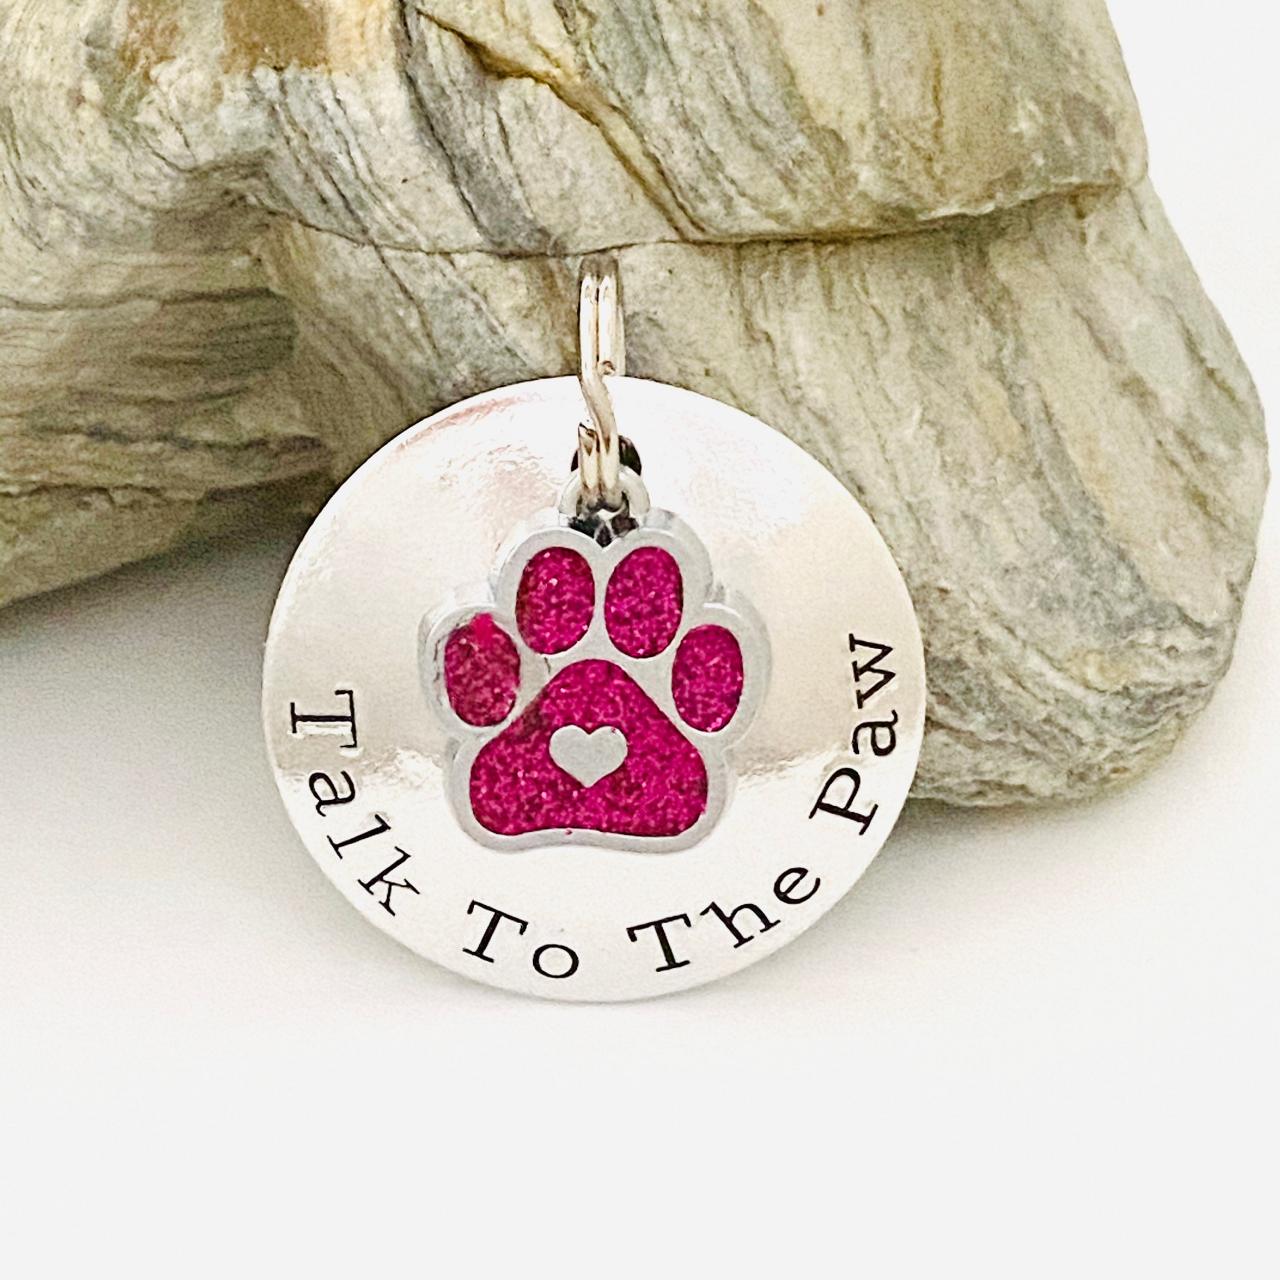 Dog ID Tag, Dog Tag For Dogs, Personalised Dog Tag, Pet ID Tag, Dog Collar Name Tag, Puppy Dog Tag, Double Sided Dog Tag. Cute Paw Print Tag